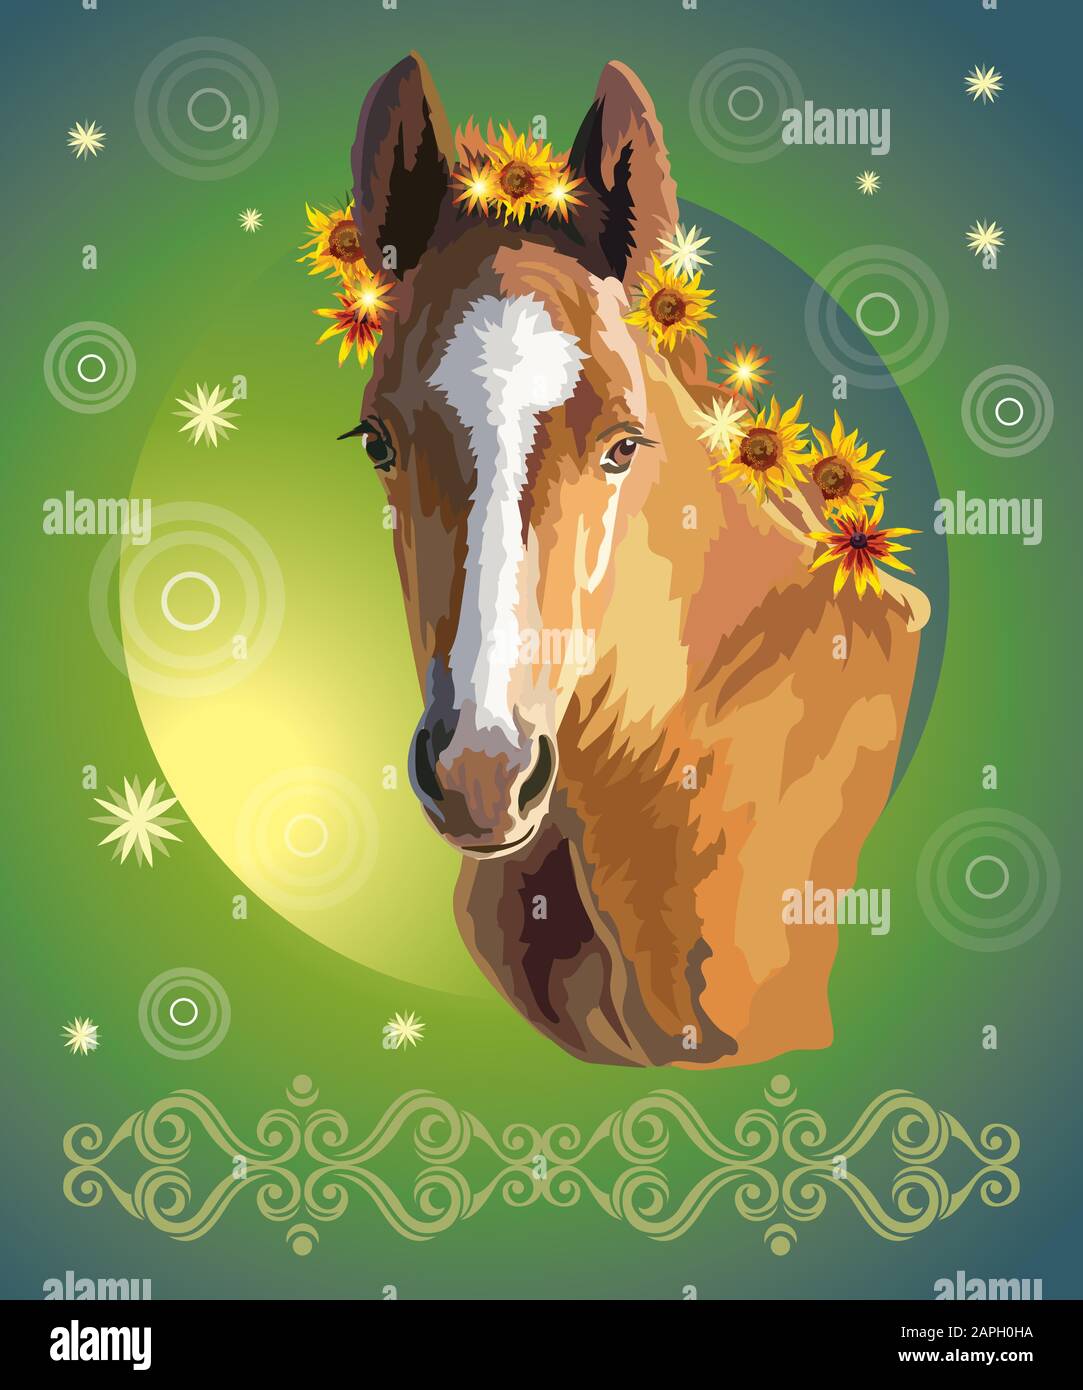 Funny foal, vector colorful realistic illustration. Portrait of bay little horse with sunflowers in mane isolated on green gradient background. Image Stock Vector